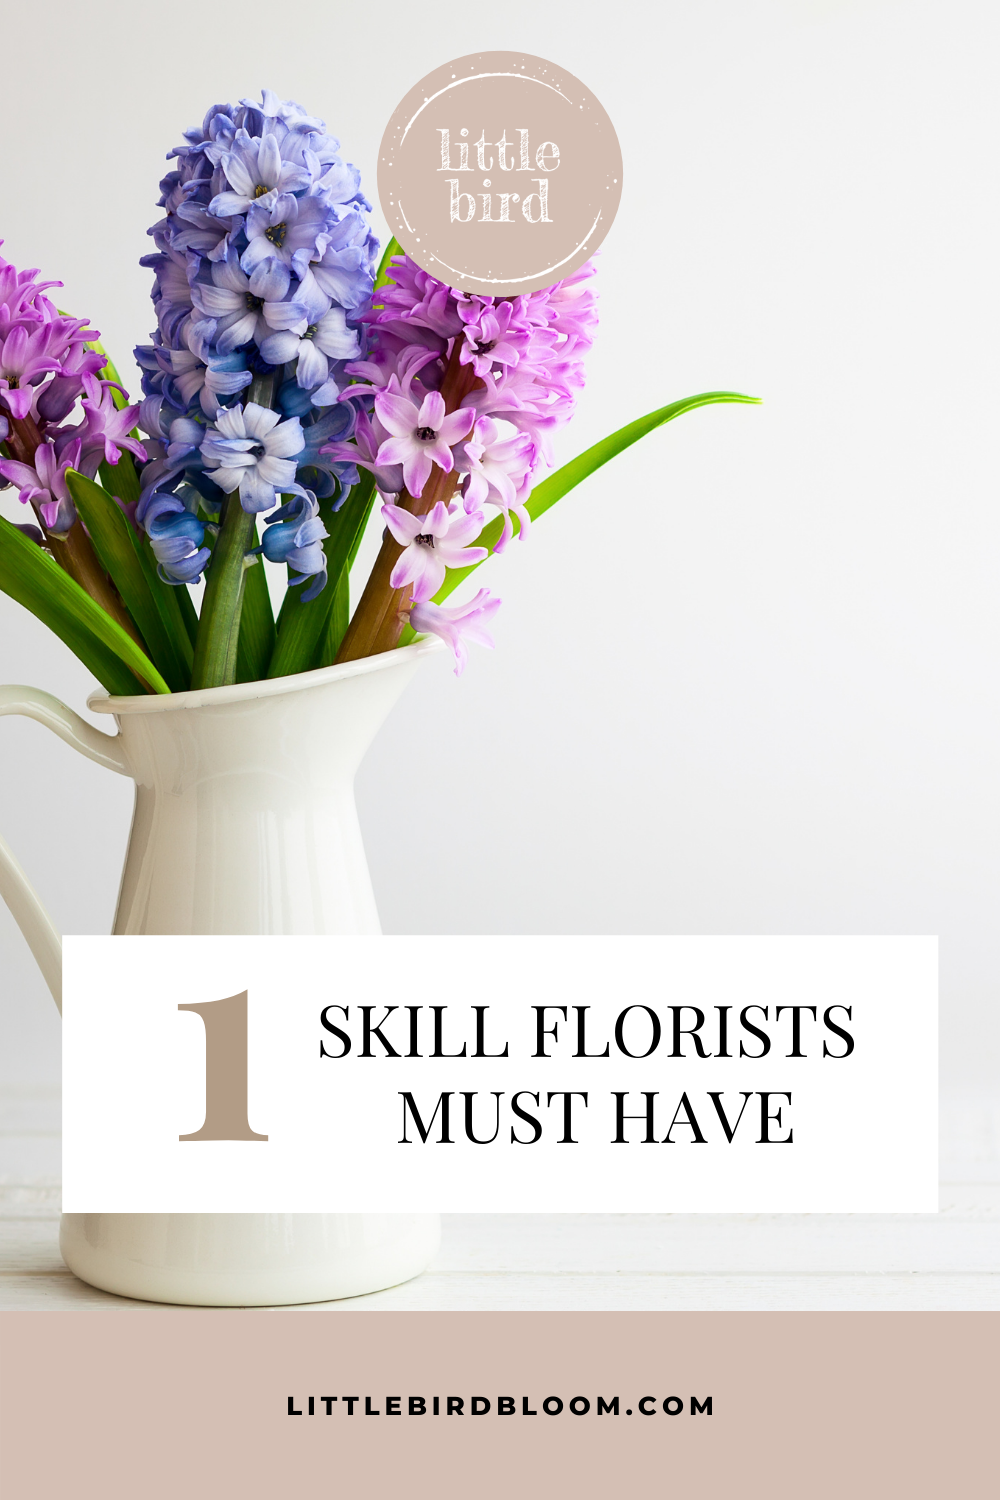 most important skill floral designers must have